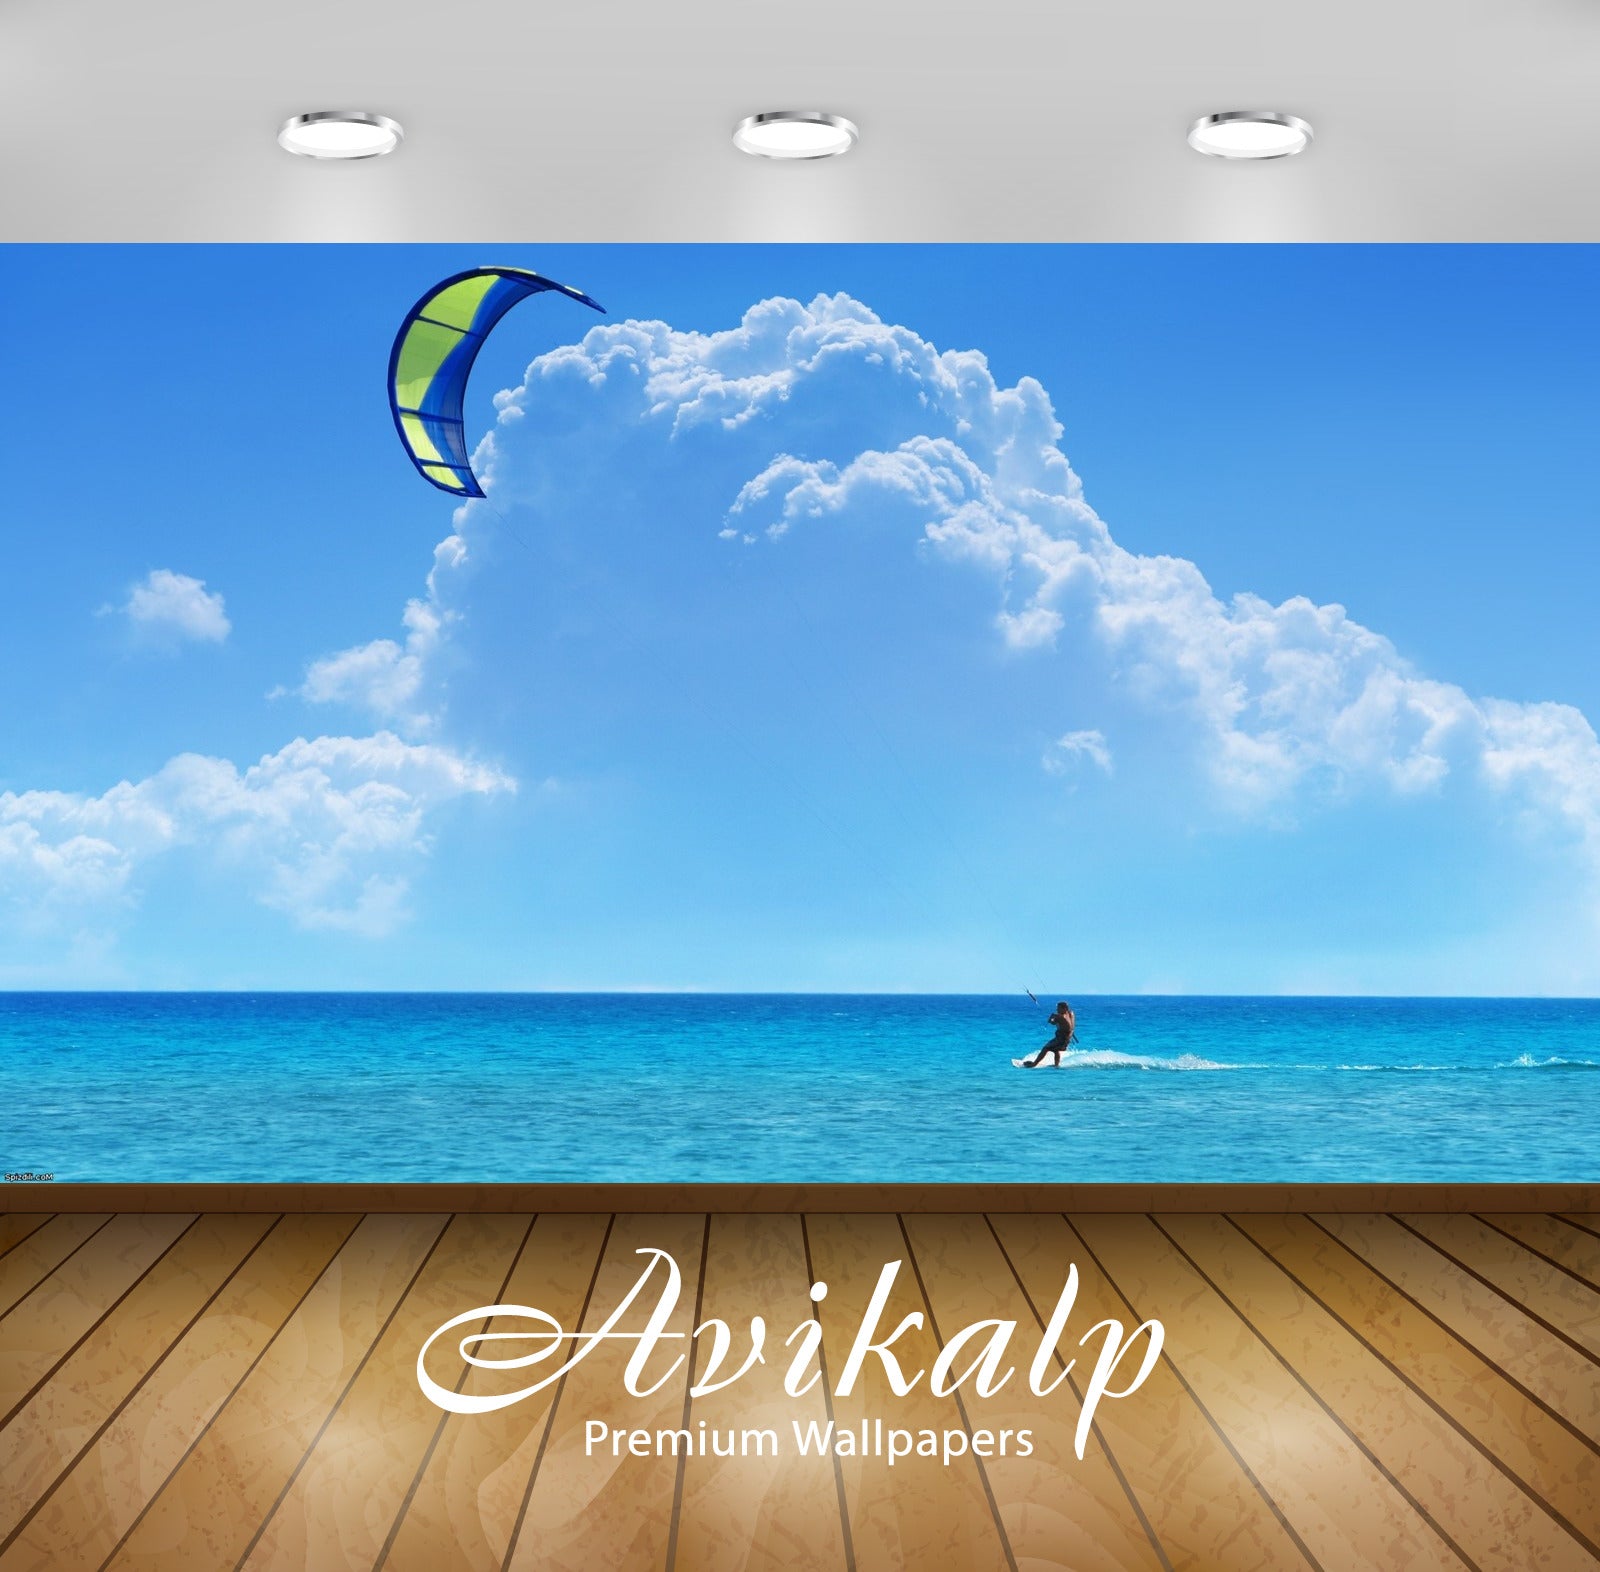 Avikalp Exclusive Awi1902 Kite Surfing Water Sport Full HD Wallpapers for Living room, Hall, Kids Ro